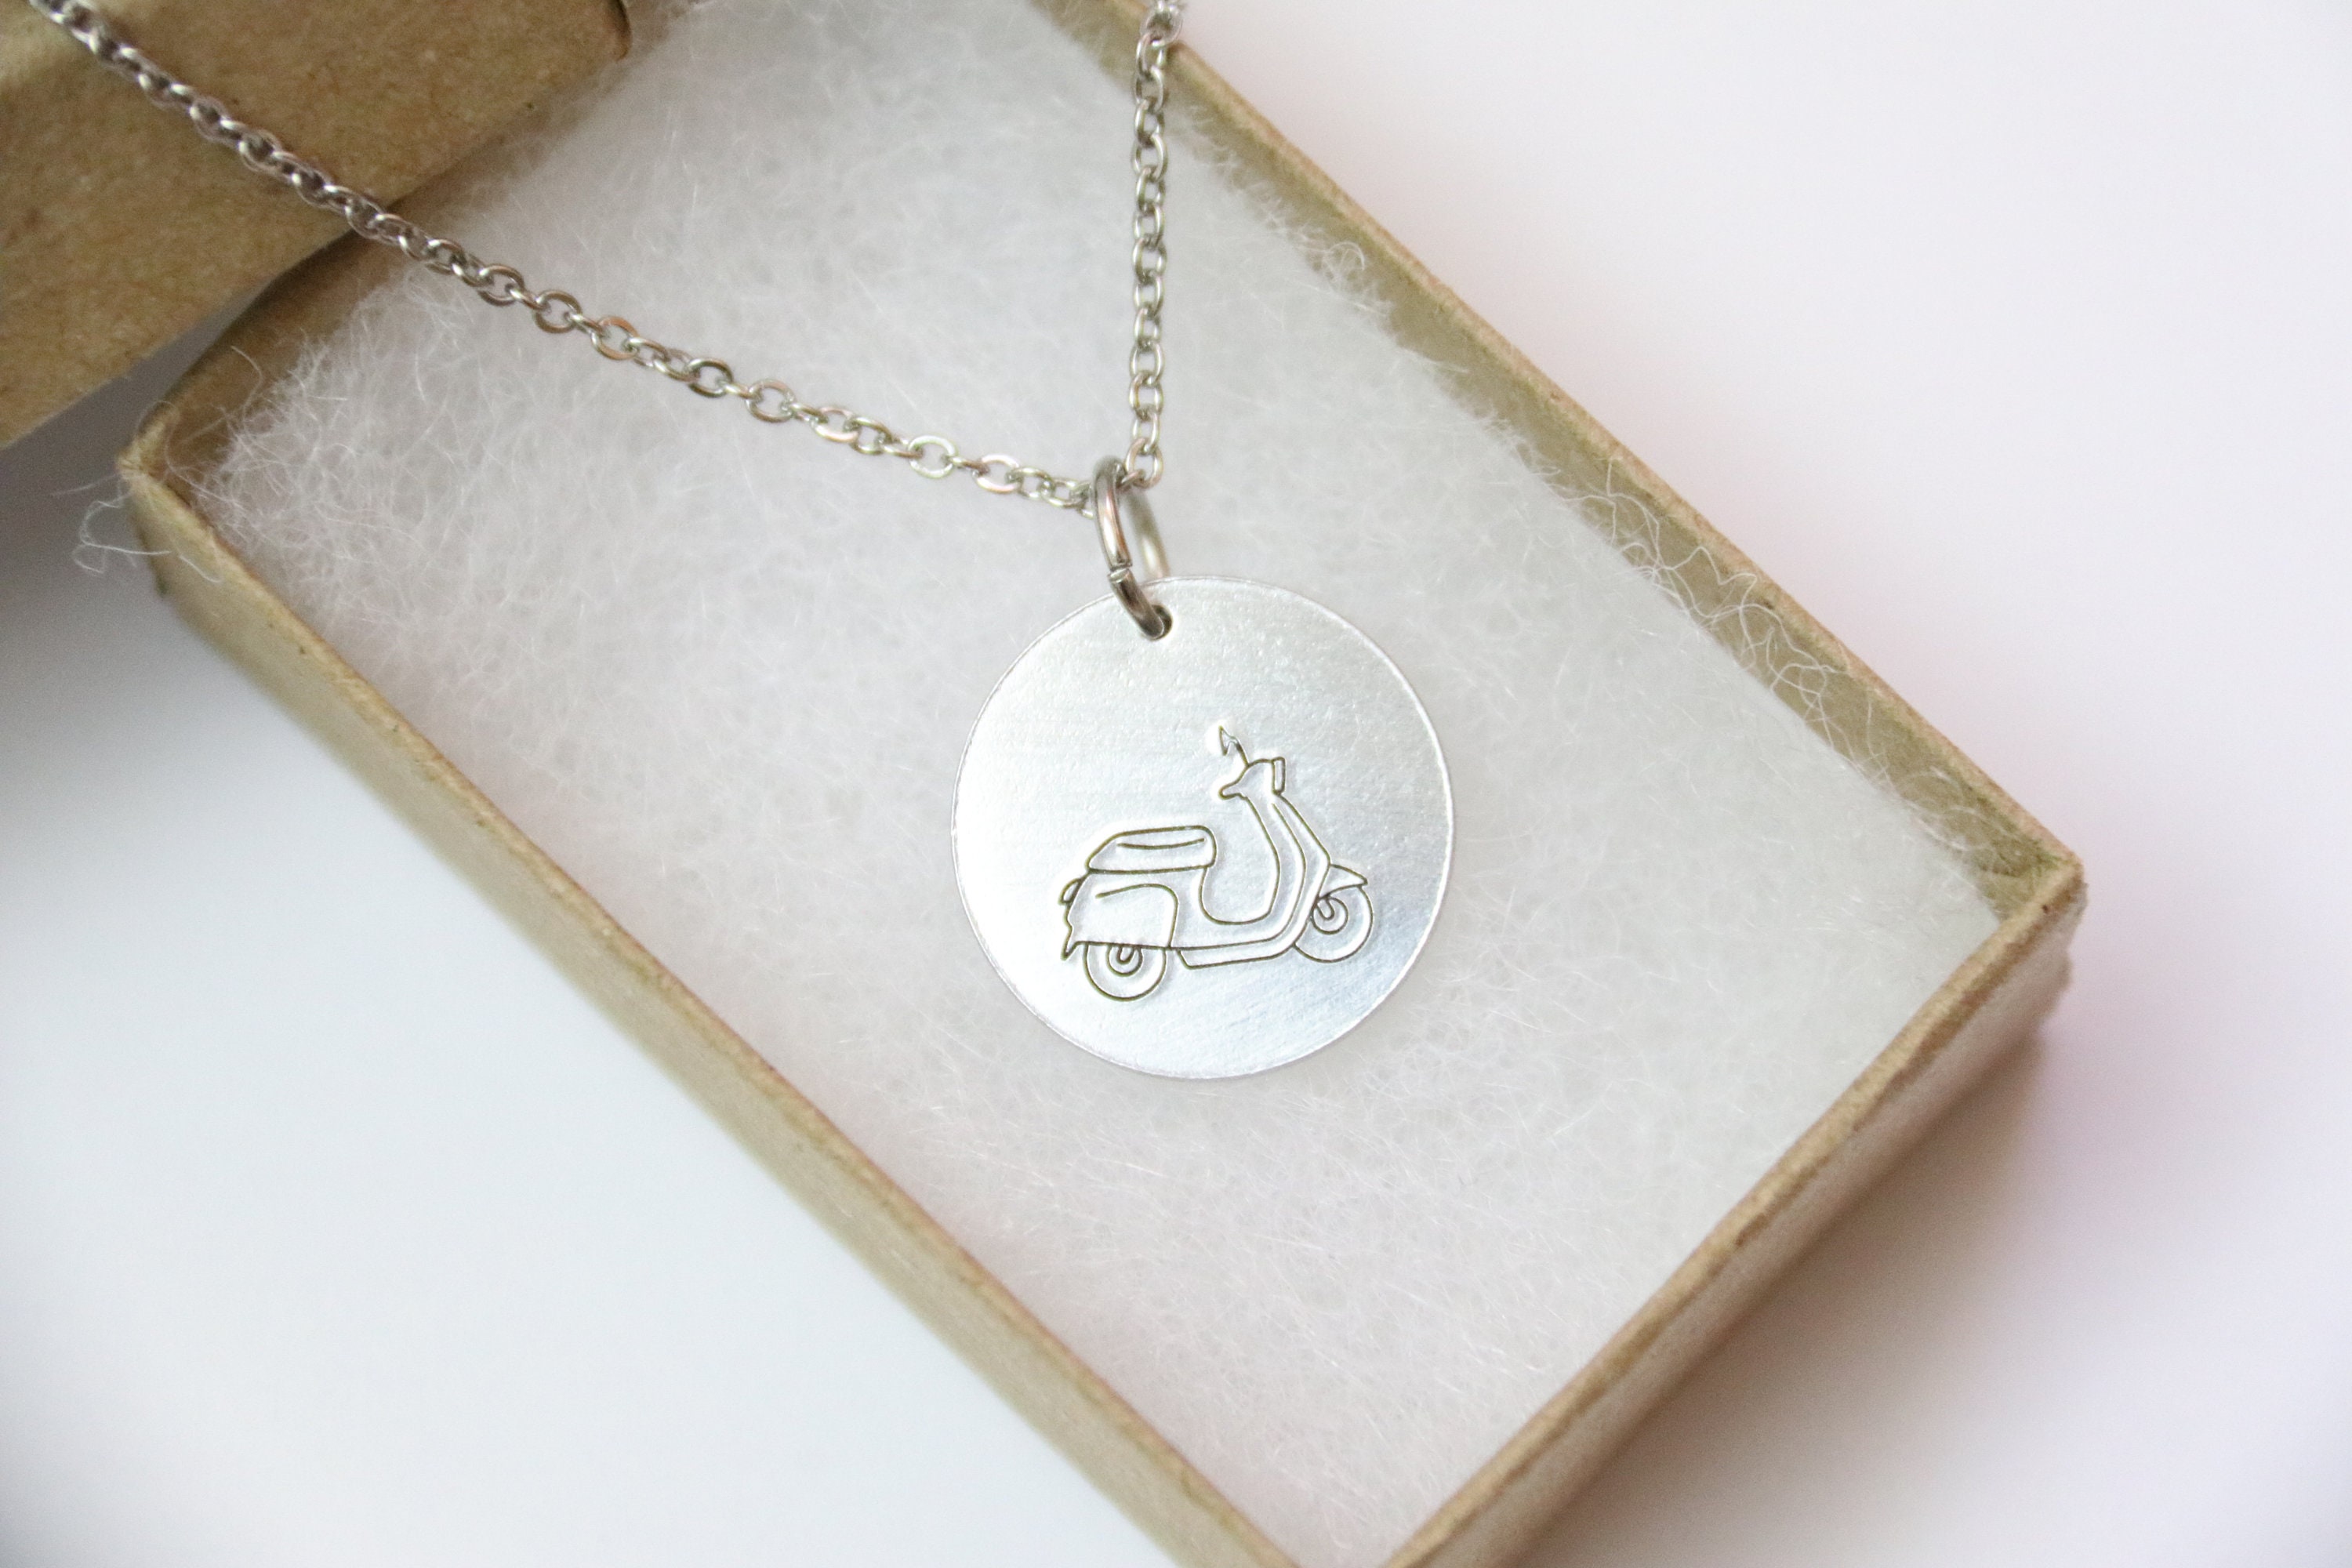 Necklaces Scooter Women Necklace SCOOTER silver Women Jewelry & Watches Scooter Women Costume Jewelry Scooter Women Necklaces & Pendants Scooter Women Necklaces Scooter Women 